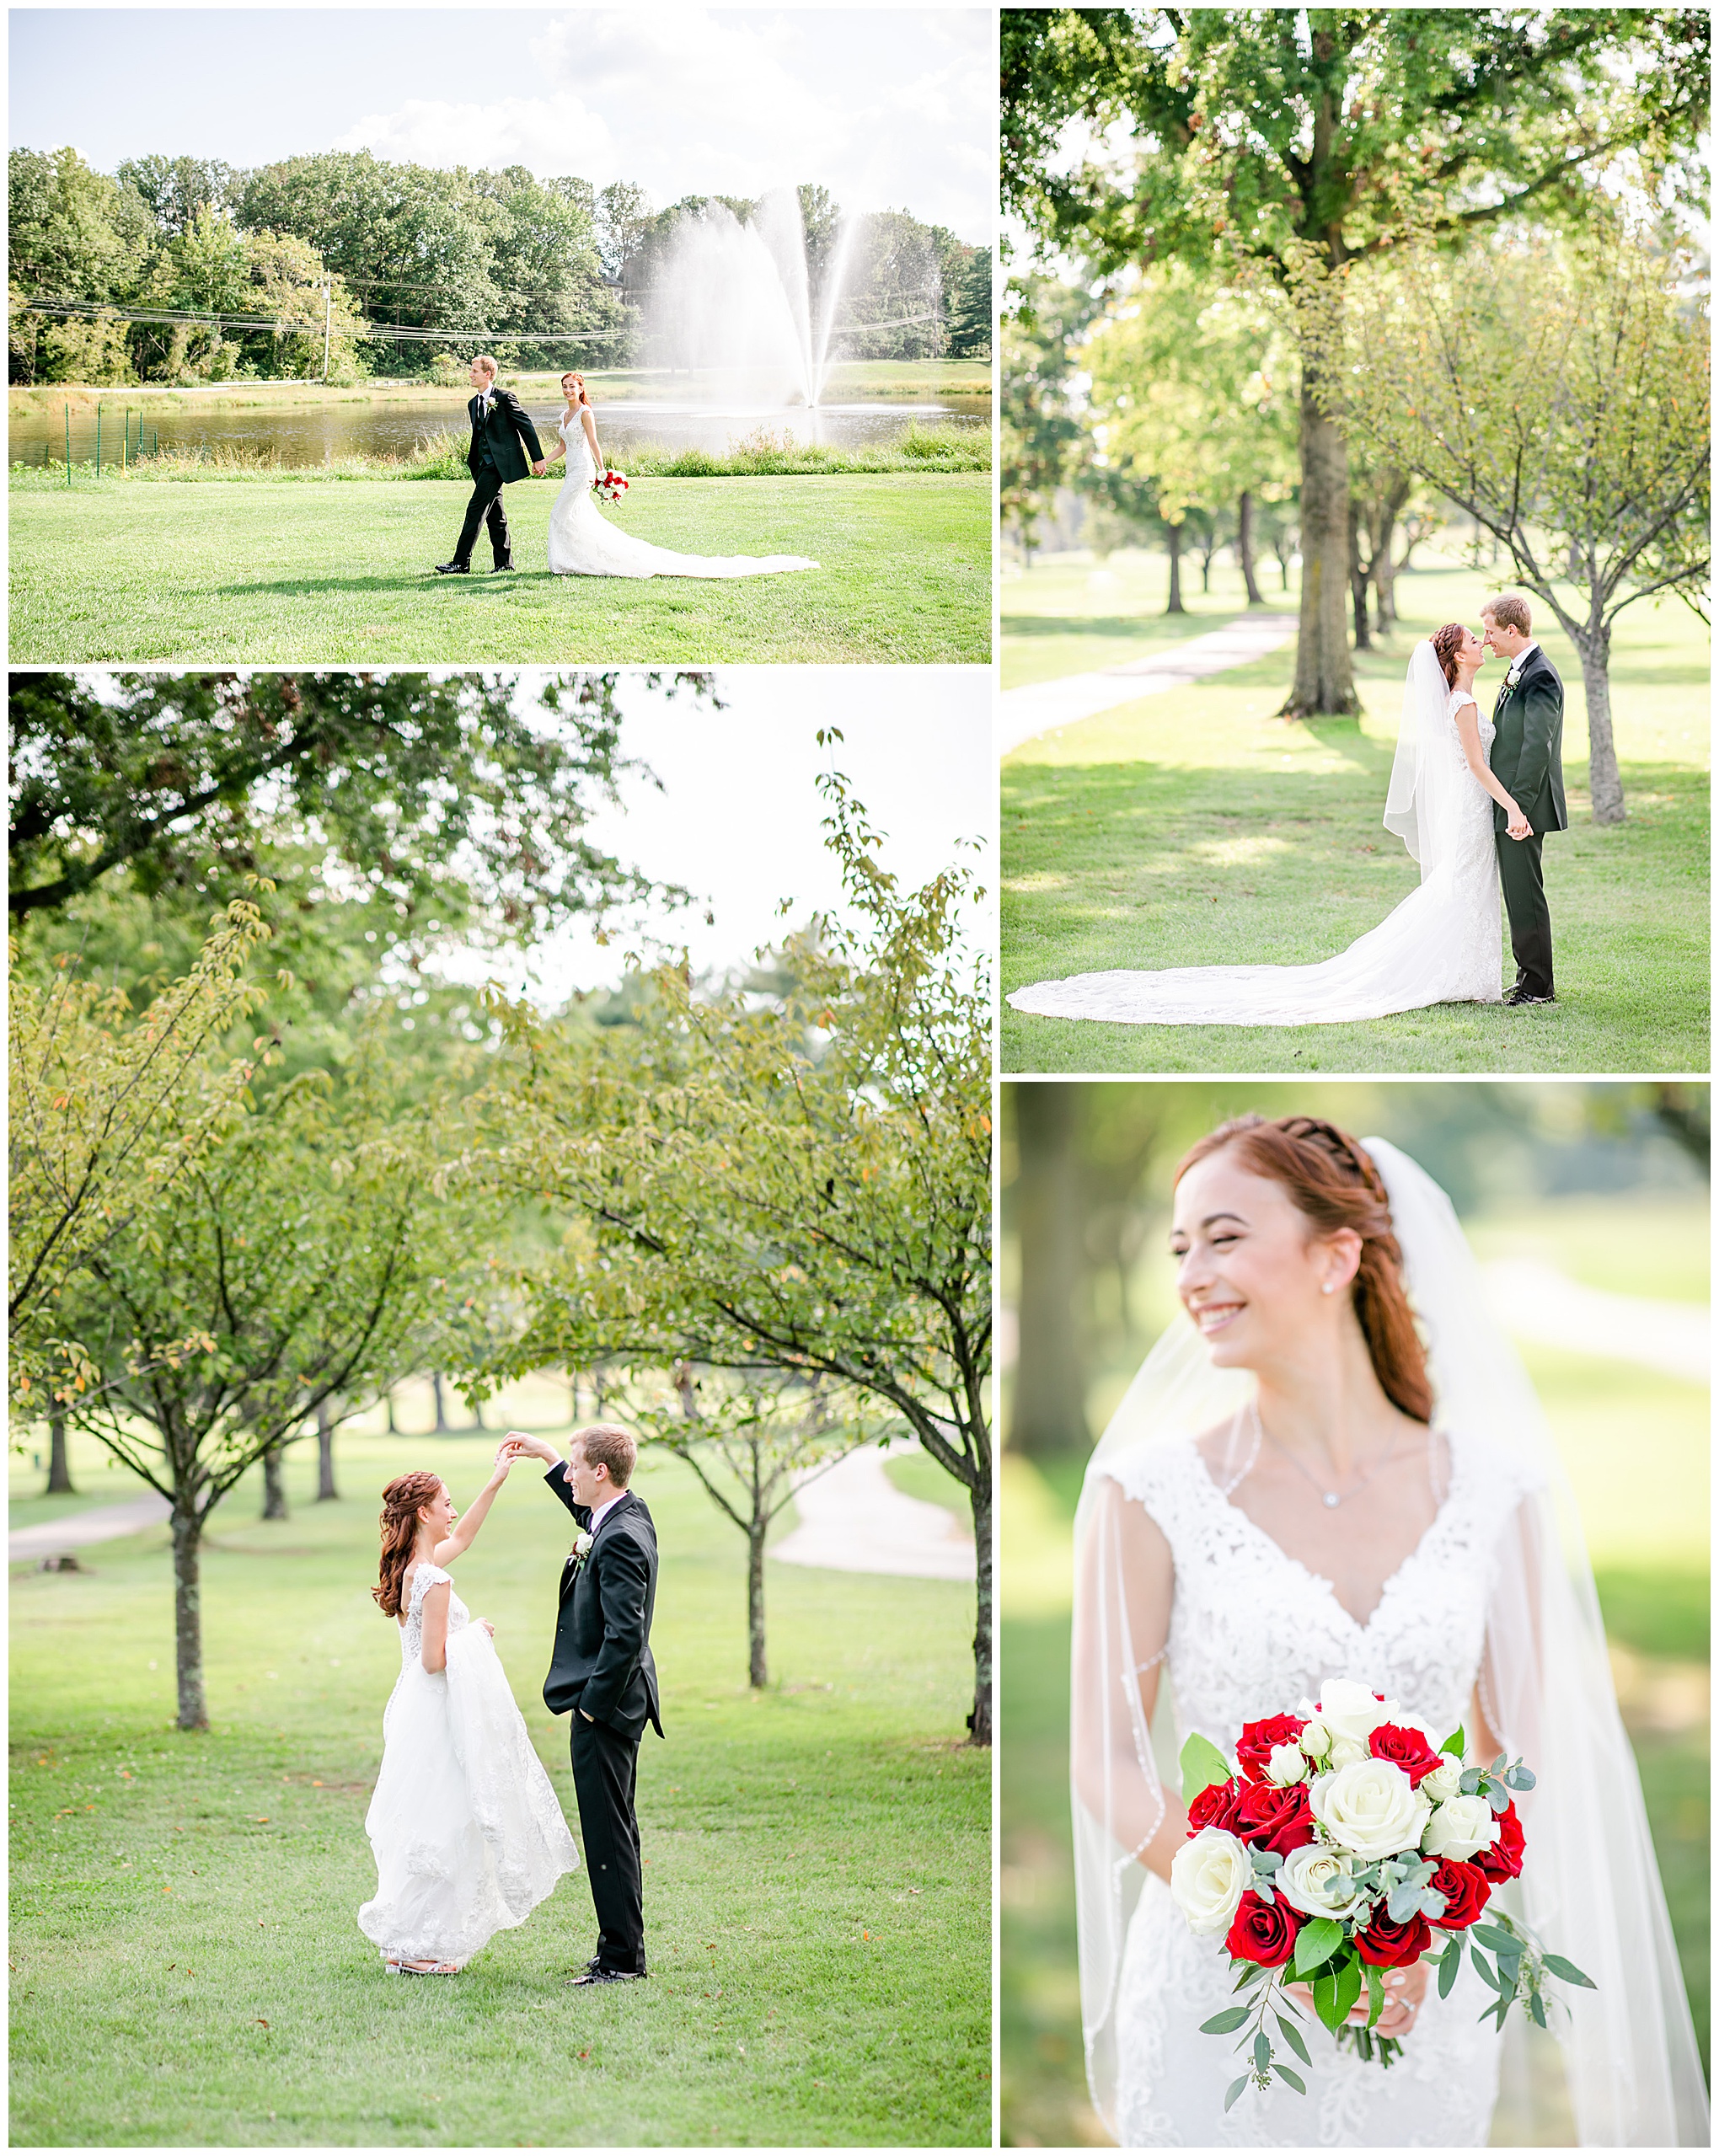 early augutmn Turf Valley Resort wedding, classic wedding aesthetic, Turf Valley Resort portraits, Elkridge wedding, Ellicott City wedding, Maryland wedding photographer, late summer wedding, early autumn wedding, autumn aesthetic, autumn wedding aesthetic, Baltimore wedding photographer, DC wedding photographer, Rachel E.H. Photography, groom spinning bride, bride and groom in front of water fountain, bride with red and white rose bouquet, Hutchinson's wedding bouquet, bride and groom holding hands